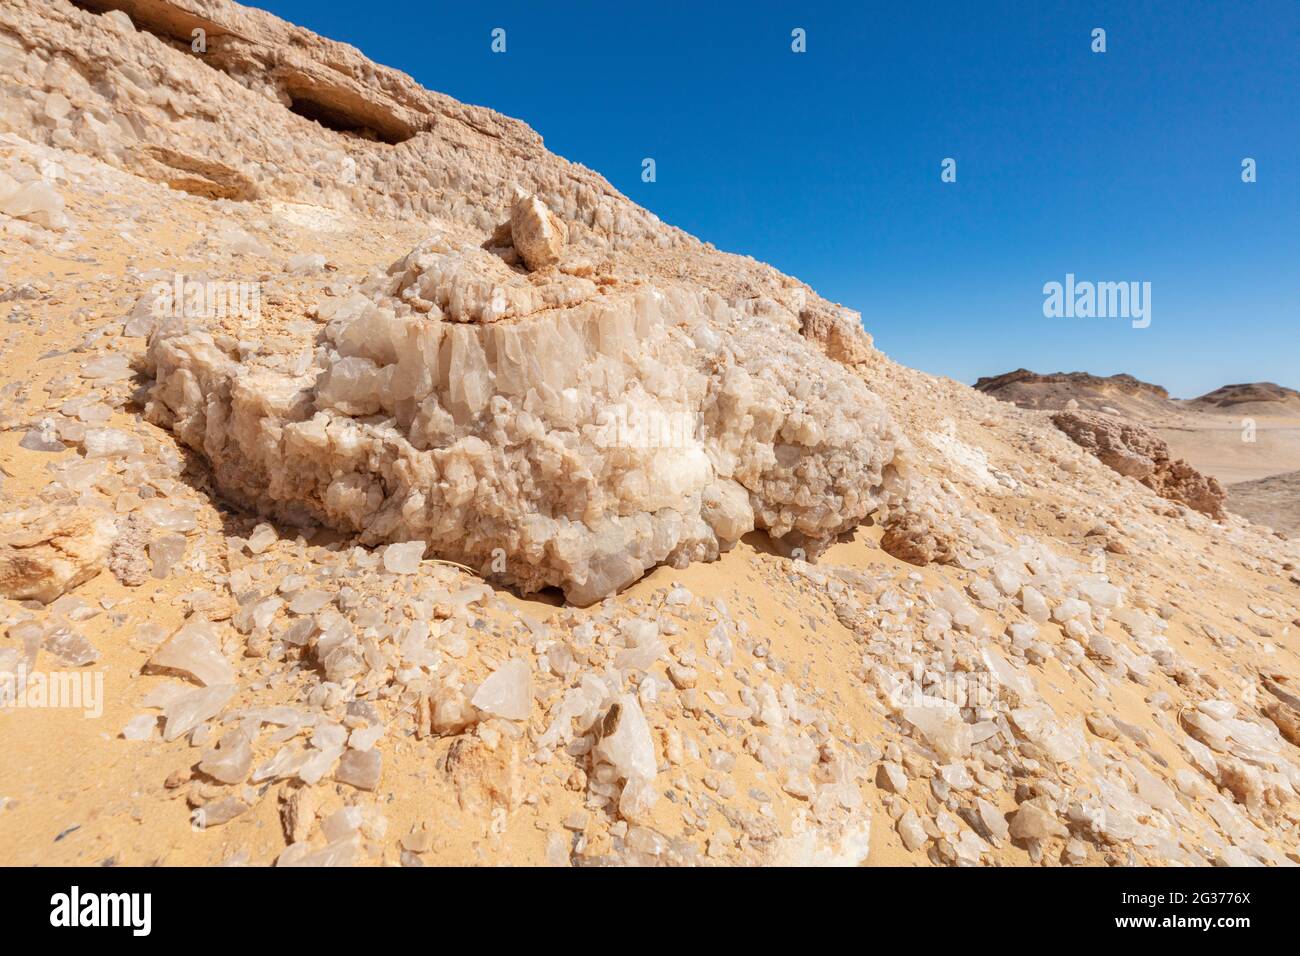 Rock Formations in the Desert on the blue sky background. Stock Photo